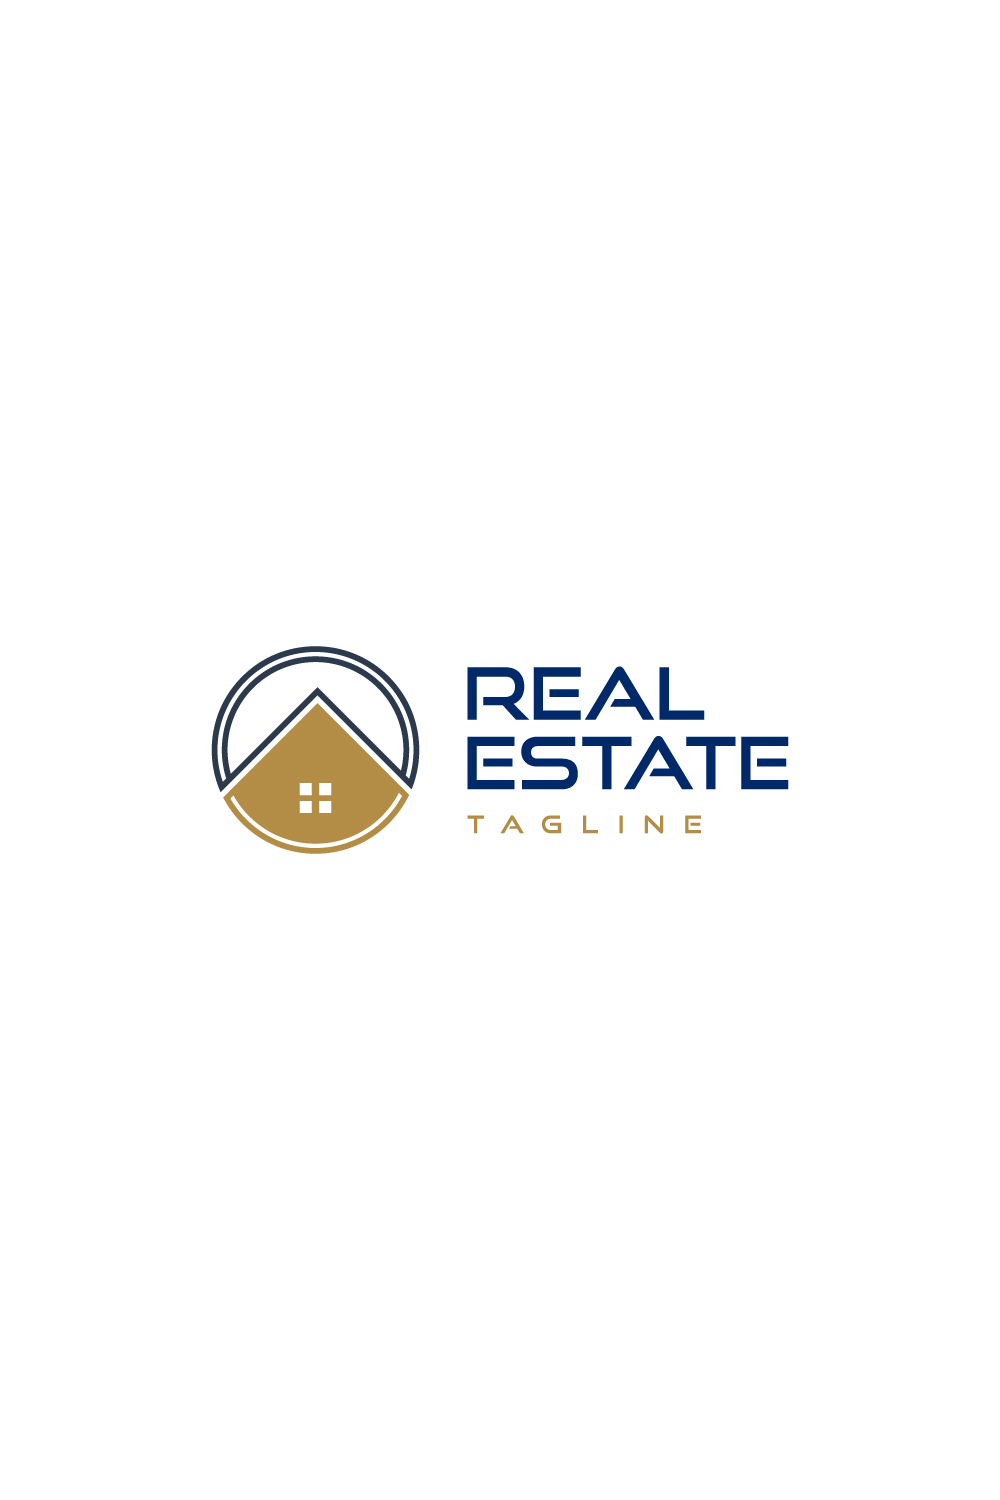 Real estate logo with golden, dark blue color which can improve your business identity House logo, property logo for real estate company pinterest preview image.